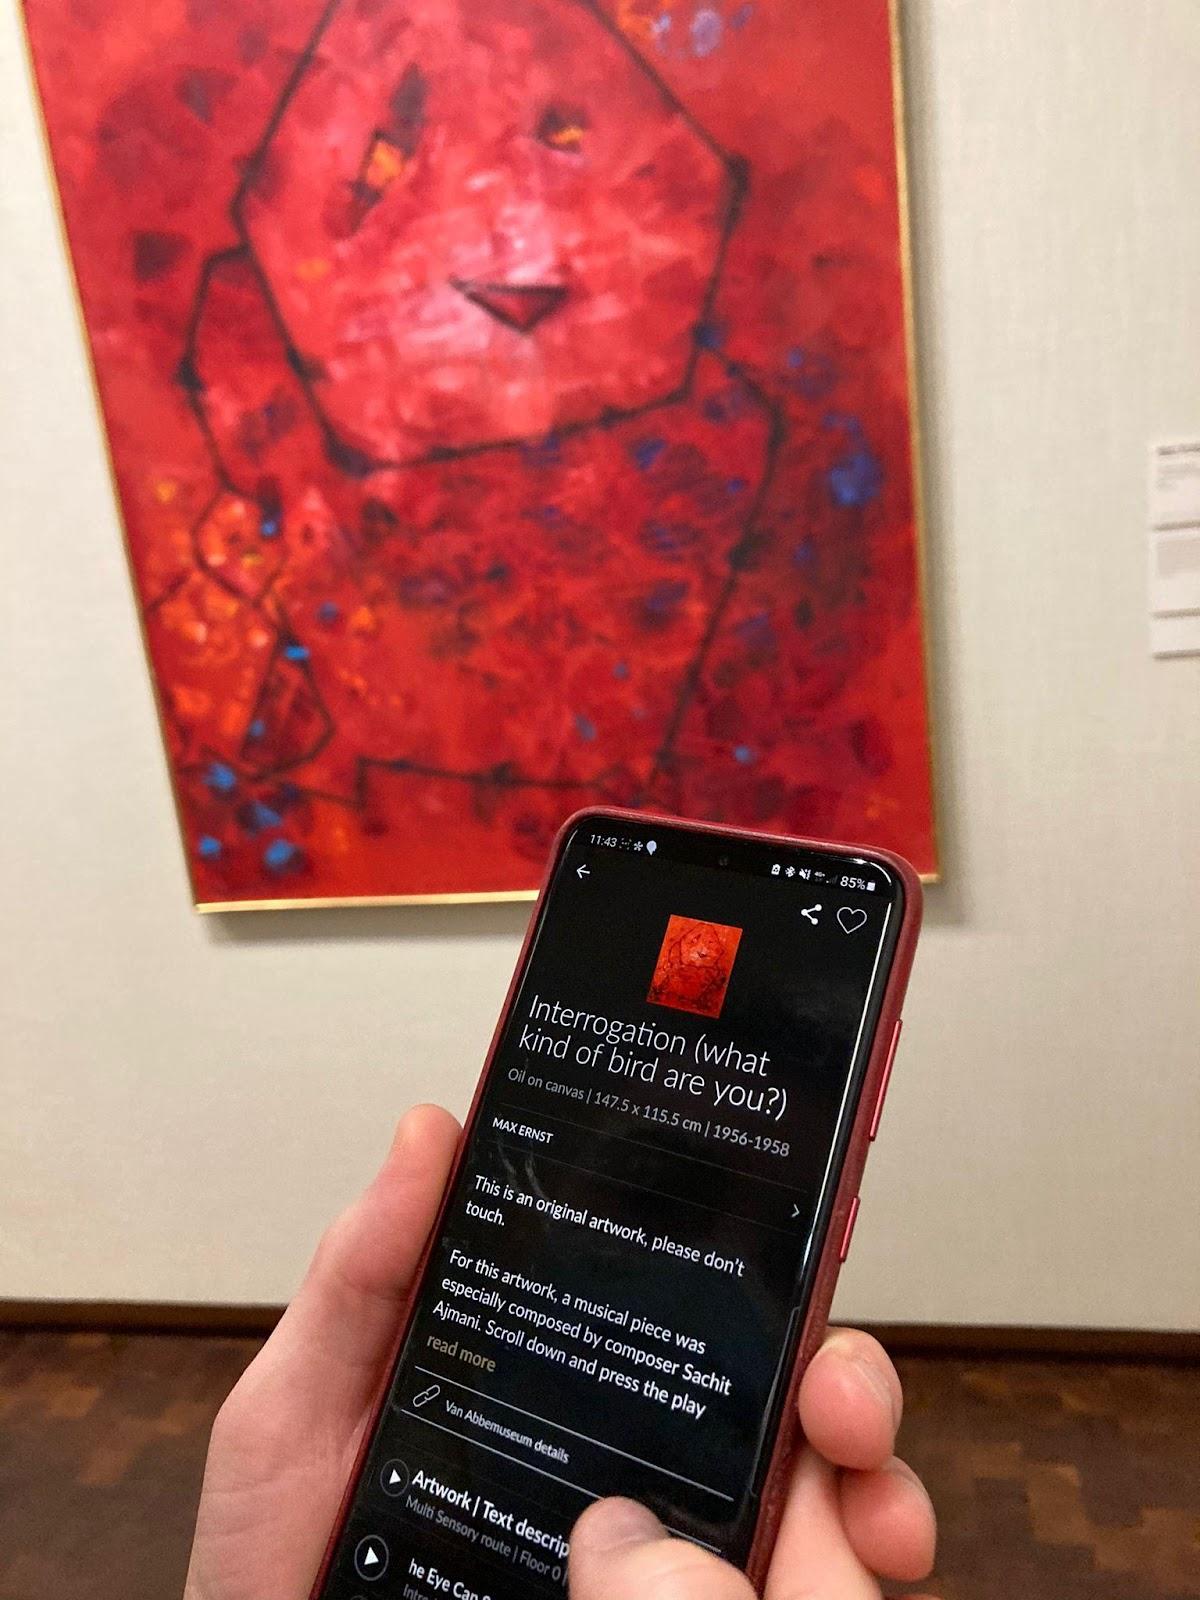 A photo of the artwork Interrogation (What Kind of Bird Are You?) (1956-1958) by Max Ernst and a phone held-in hand in front of it. On the screen of the phone is the digital app of the museum that contains the musical piece composed for the piece by composer Sachit Ajmani that the visitors can listen to.